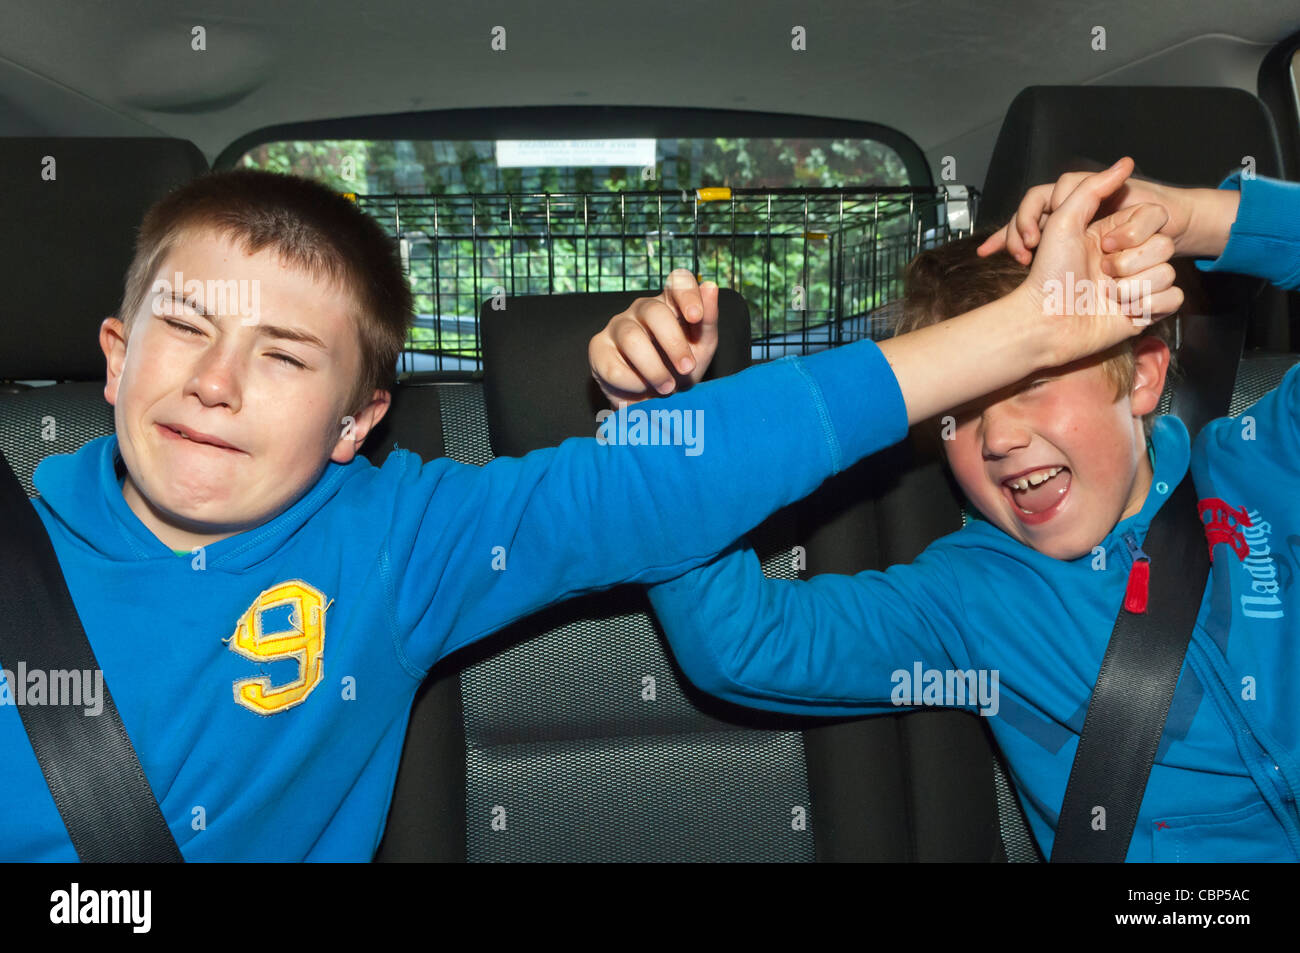 Two brothers boys children fighting in the car showing the difficulty of driving with kids on board in the Uk Stock Photo